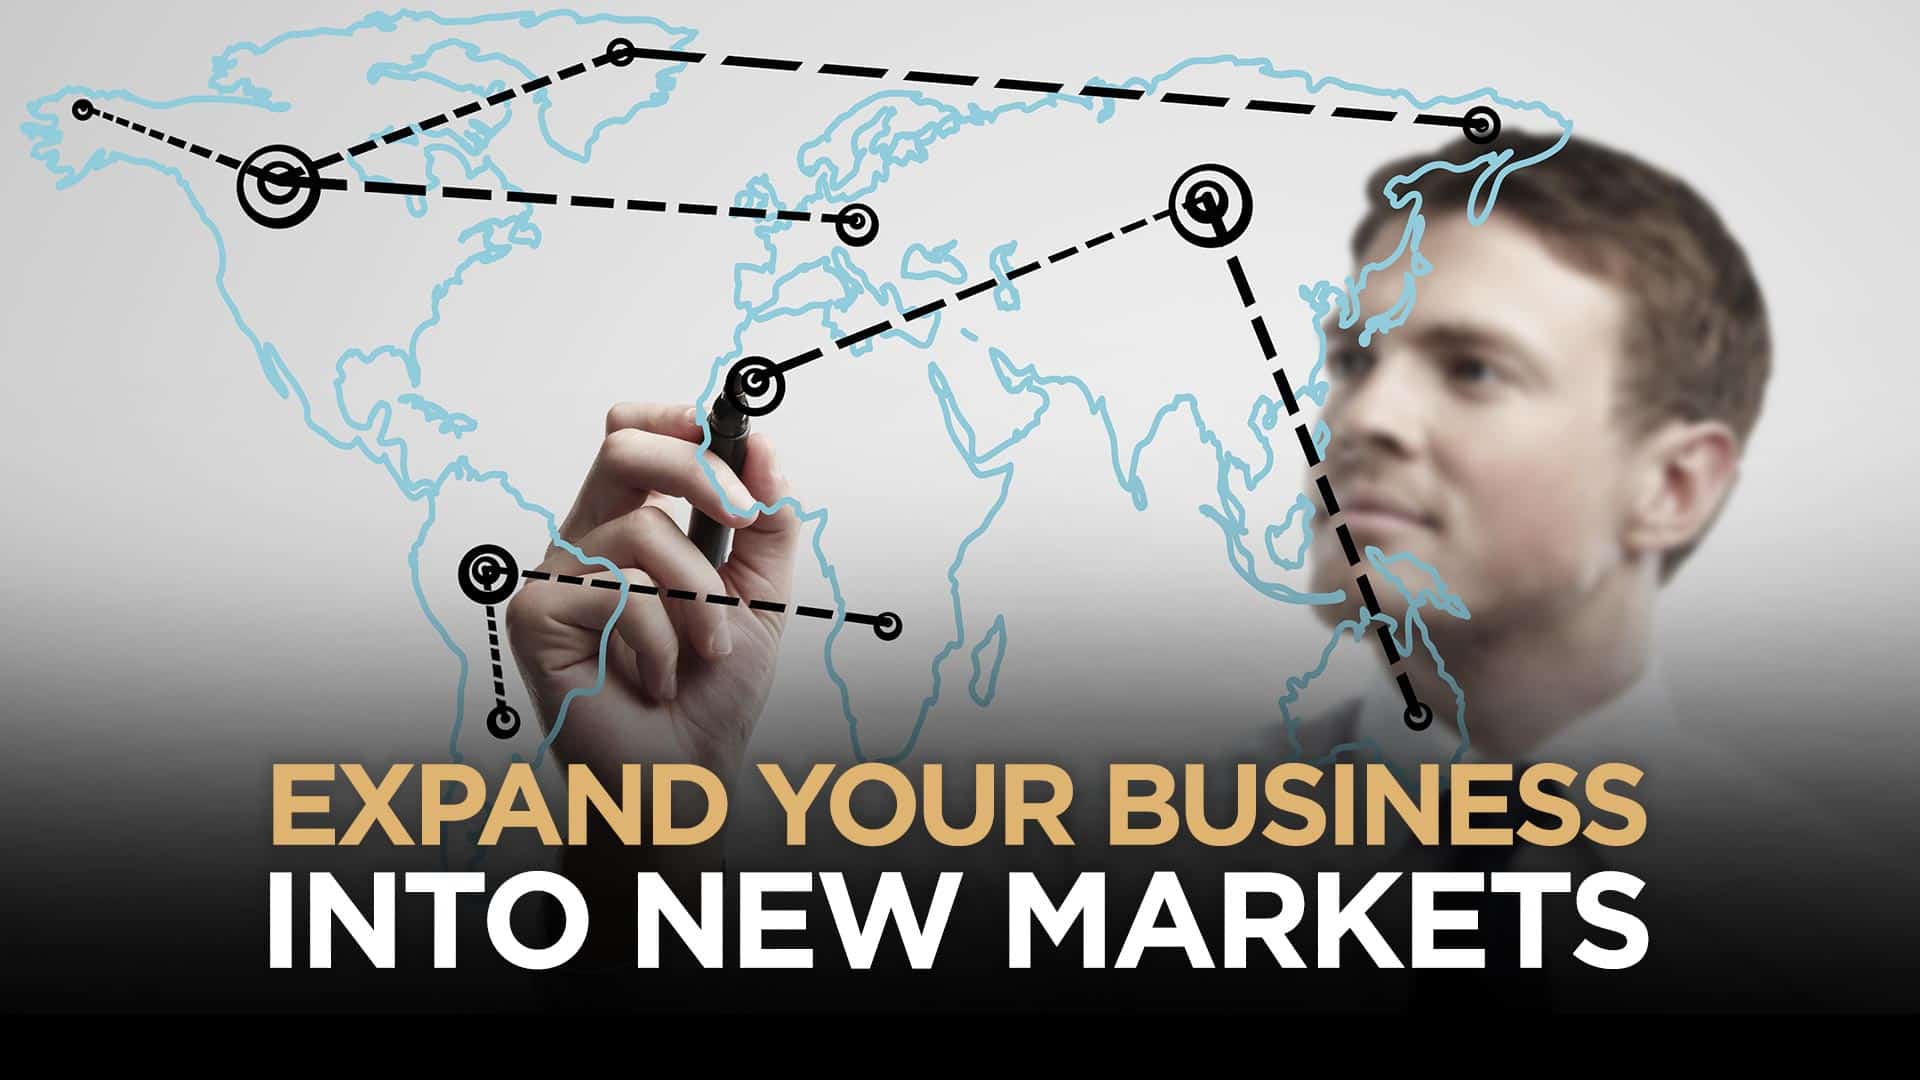 How To Expand Your Business Into New Markets